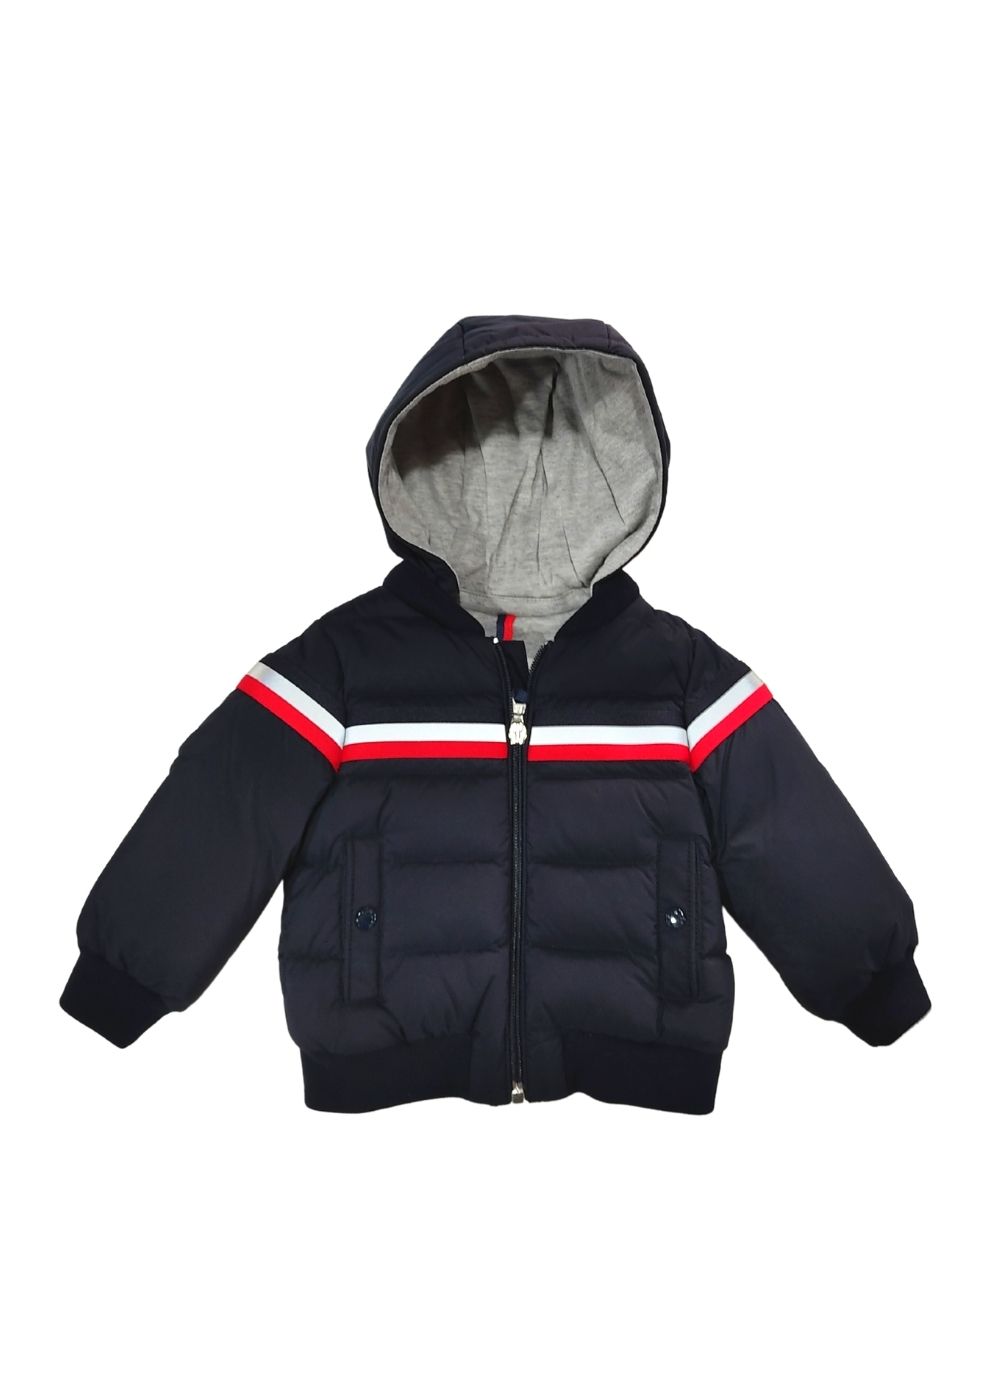 Featured image for “MONCLER "PERD" BLU”